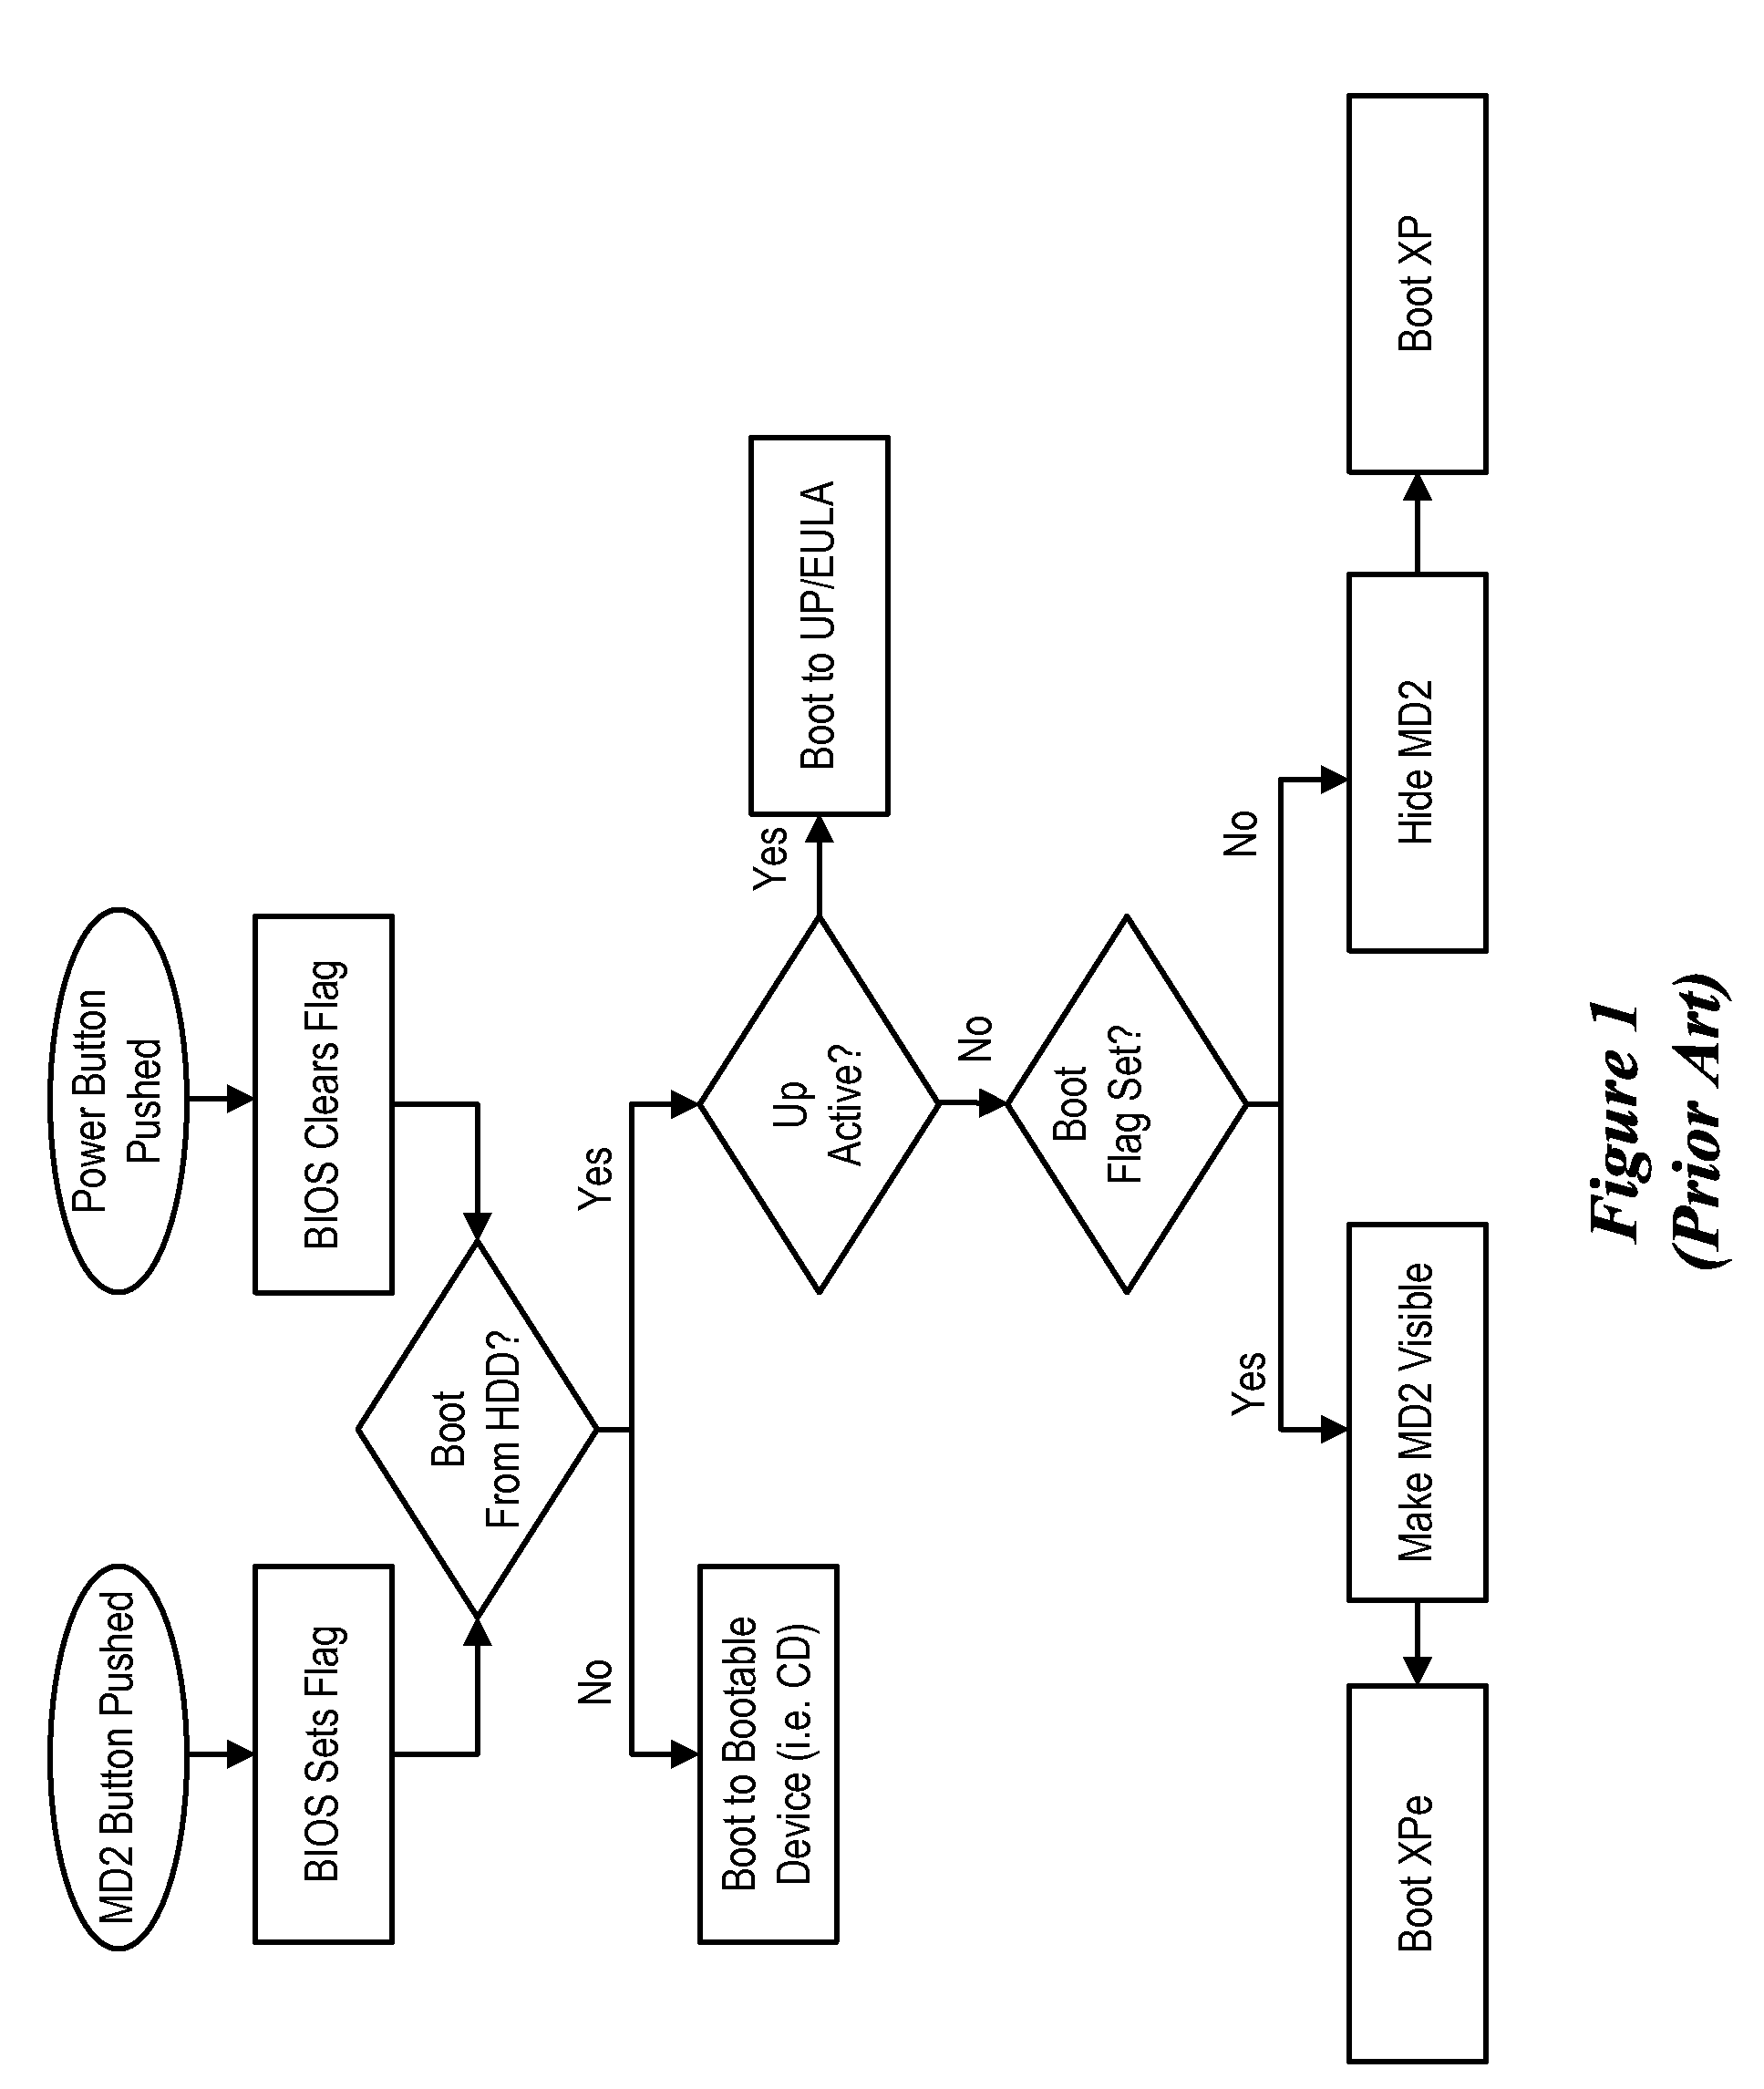 System for registering and initiating pre-boot environment for enabling partitions